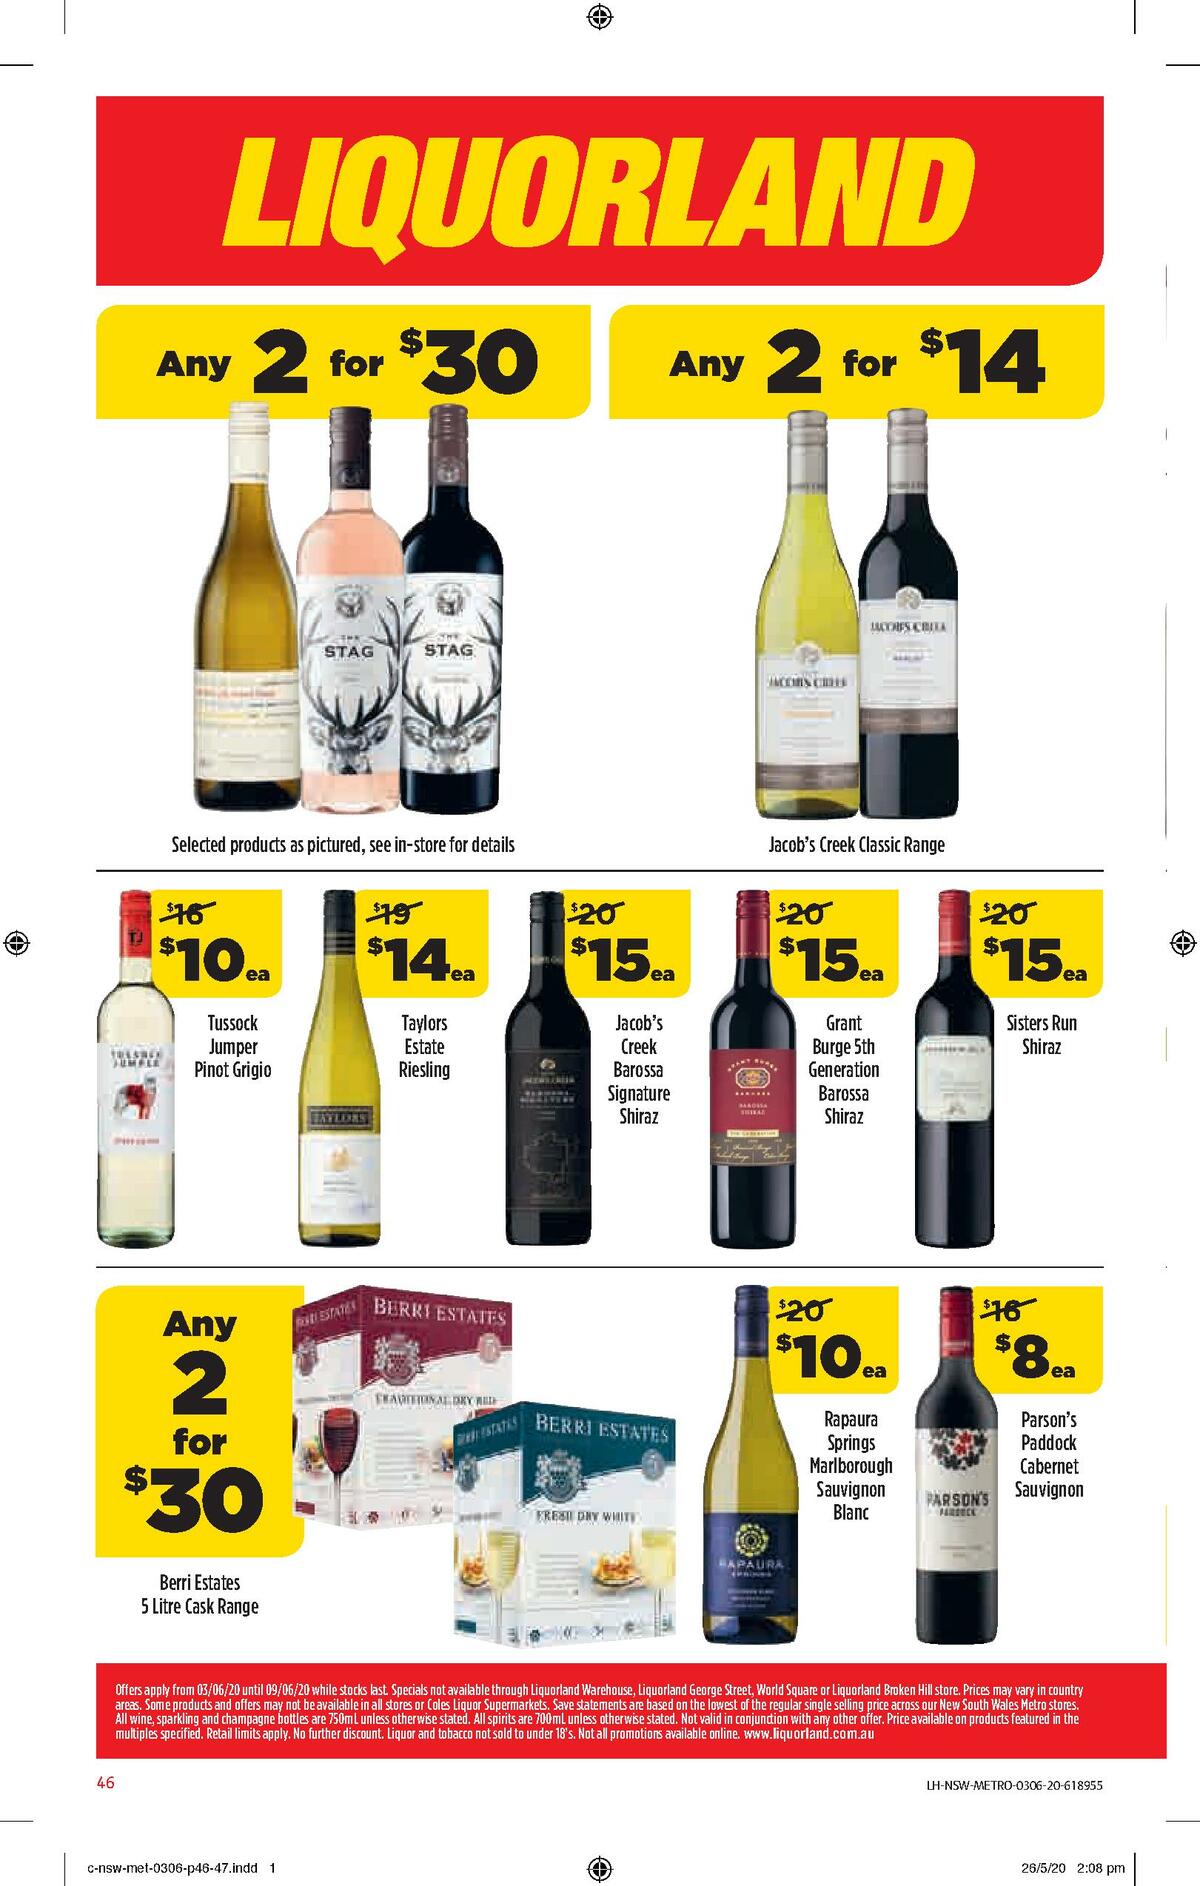 Coles Catalogues from 3 June